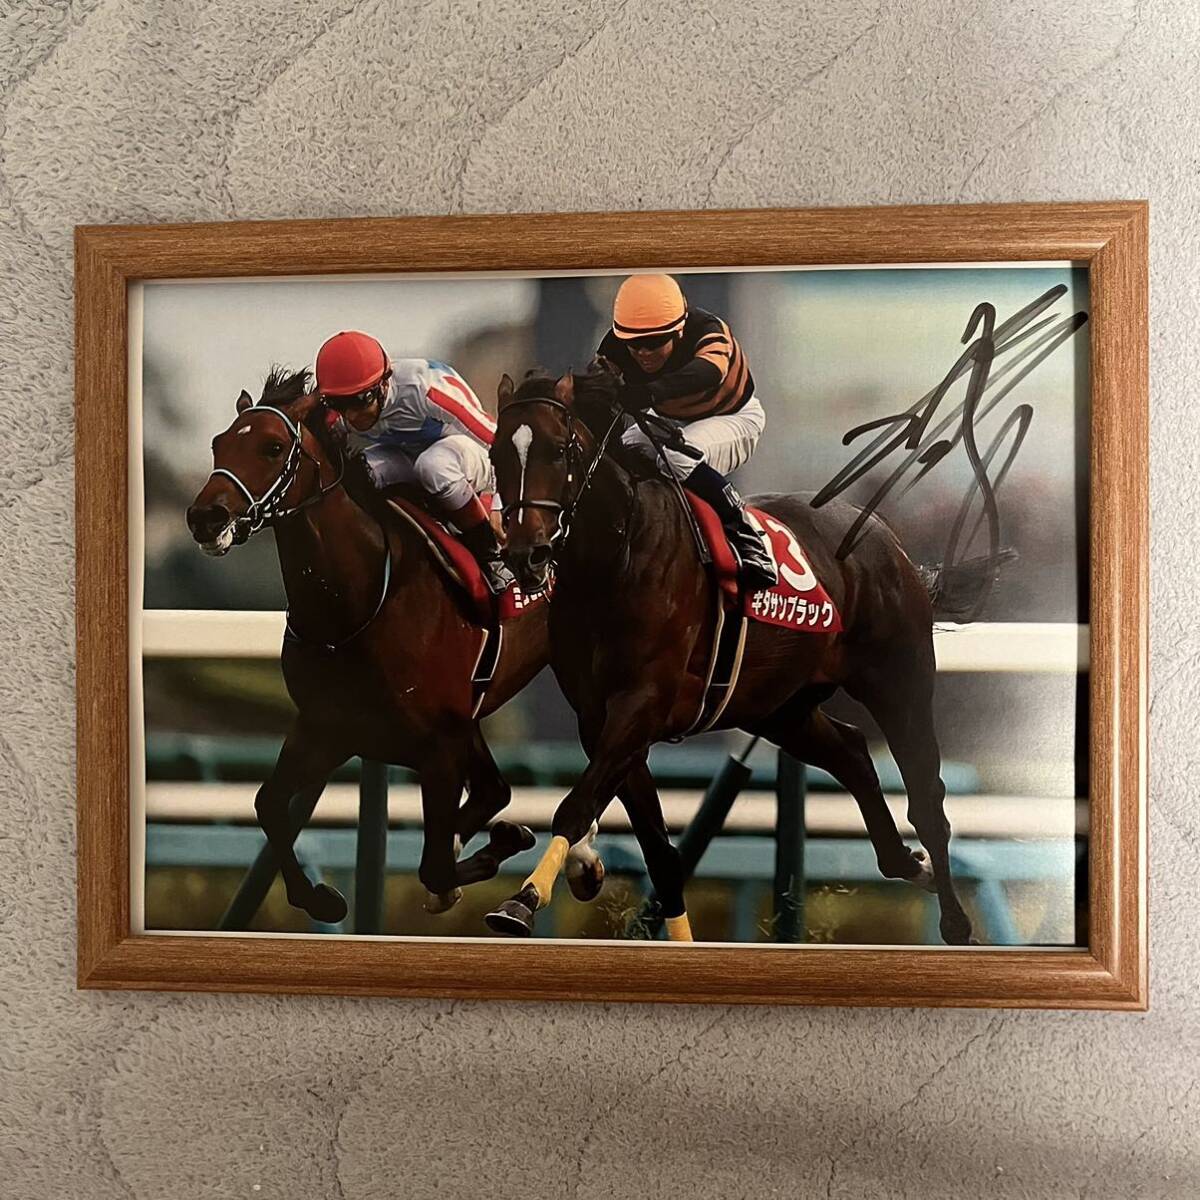  horse racing kita sun black north ... with autograph A4 photograph amount attaching ikino axle mail .. wistaria rice field . 7 . number actual use horse ticket goods 